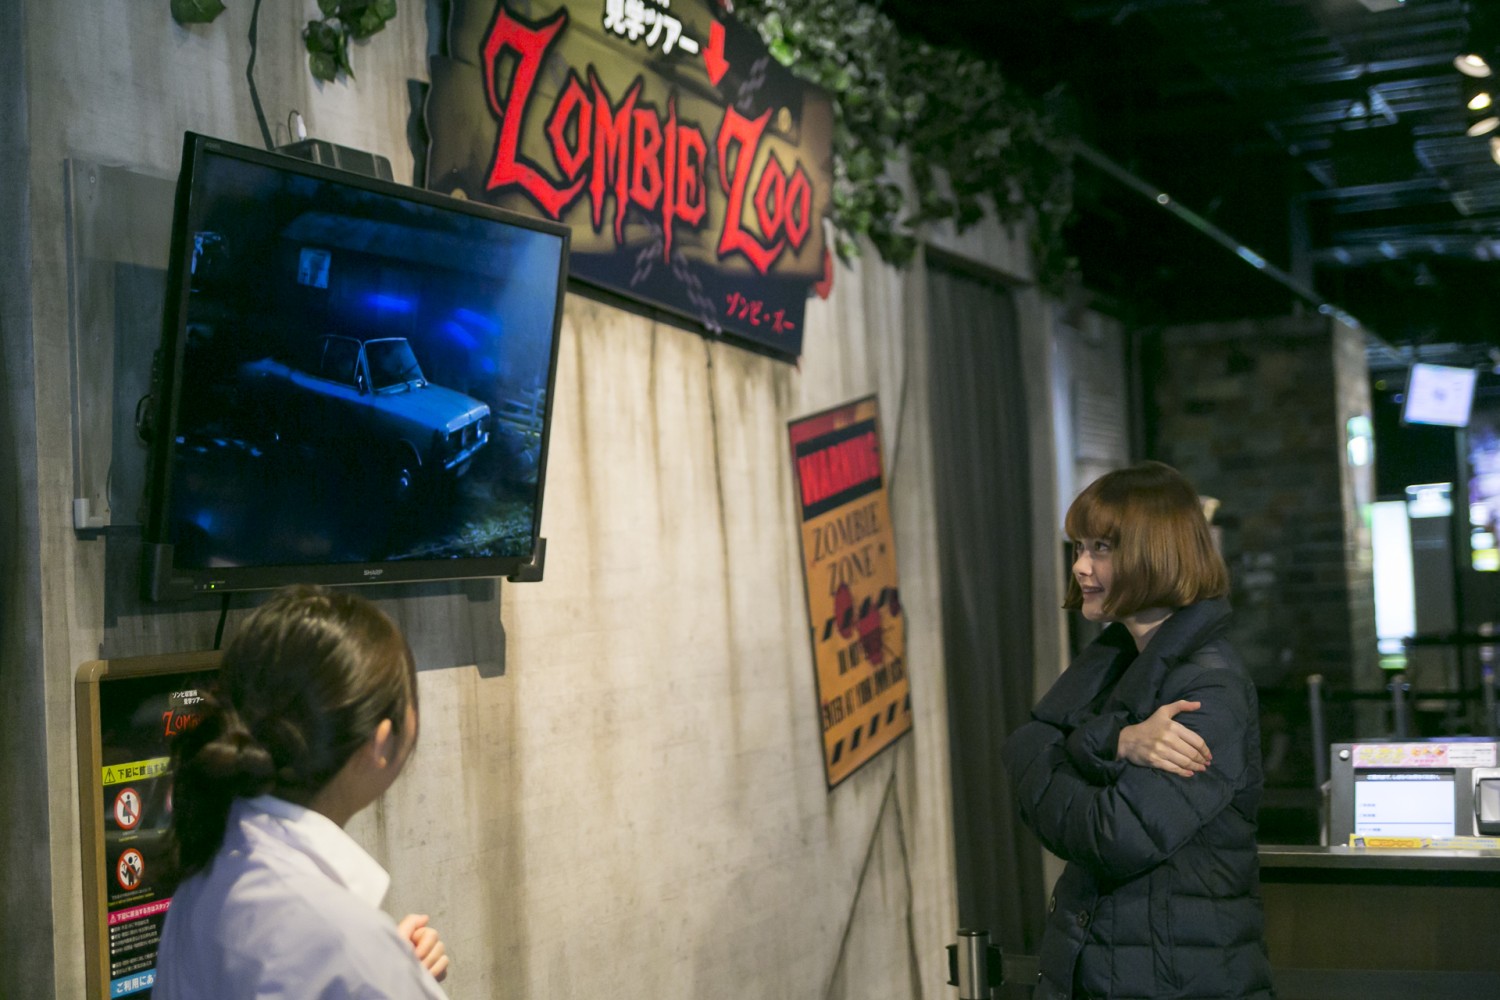 Zombies Escaped and Created a State of Huge Panic at “ZOMBIE ZOO ~A Tour of a Zombie Holding Facility~”